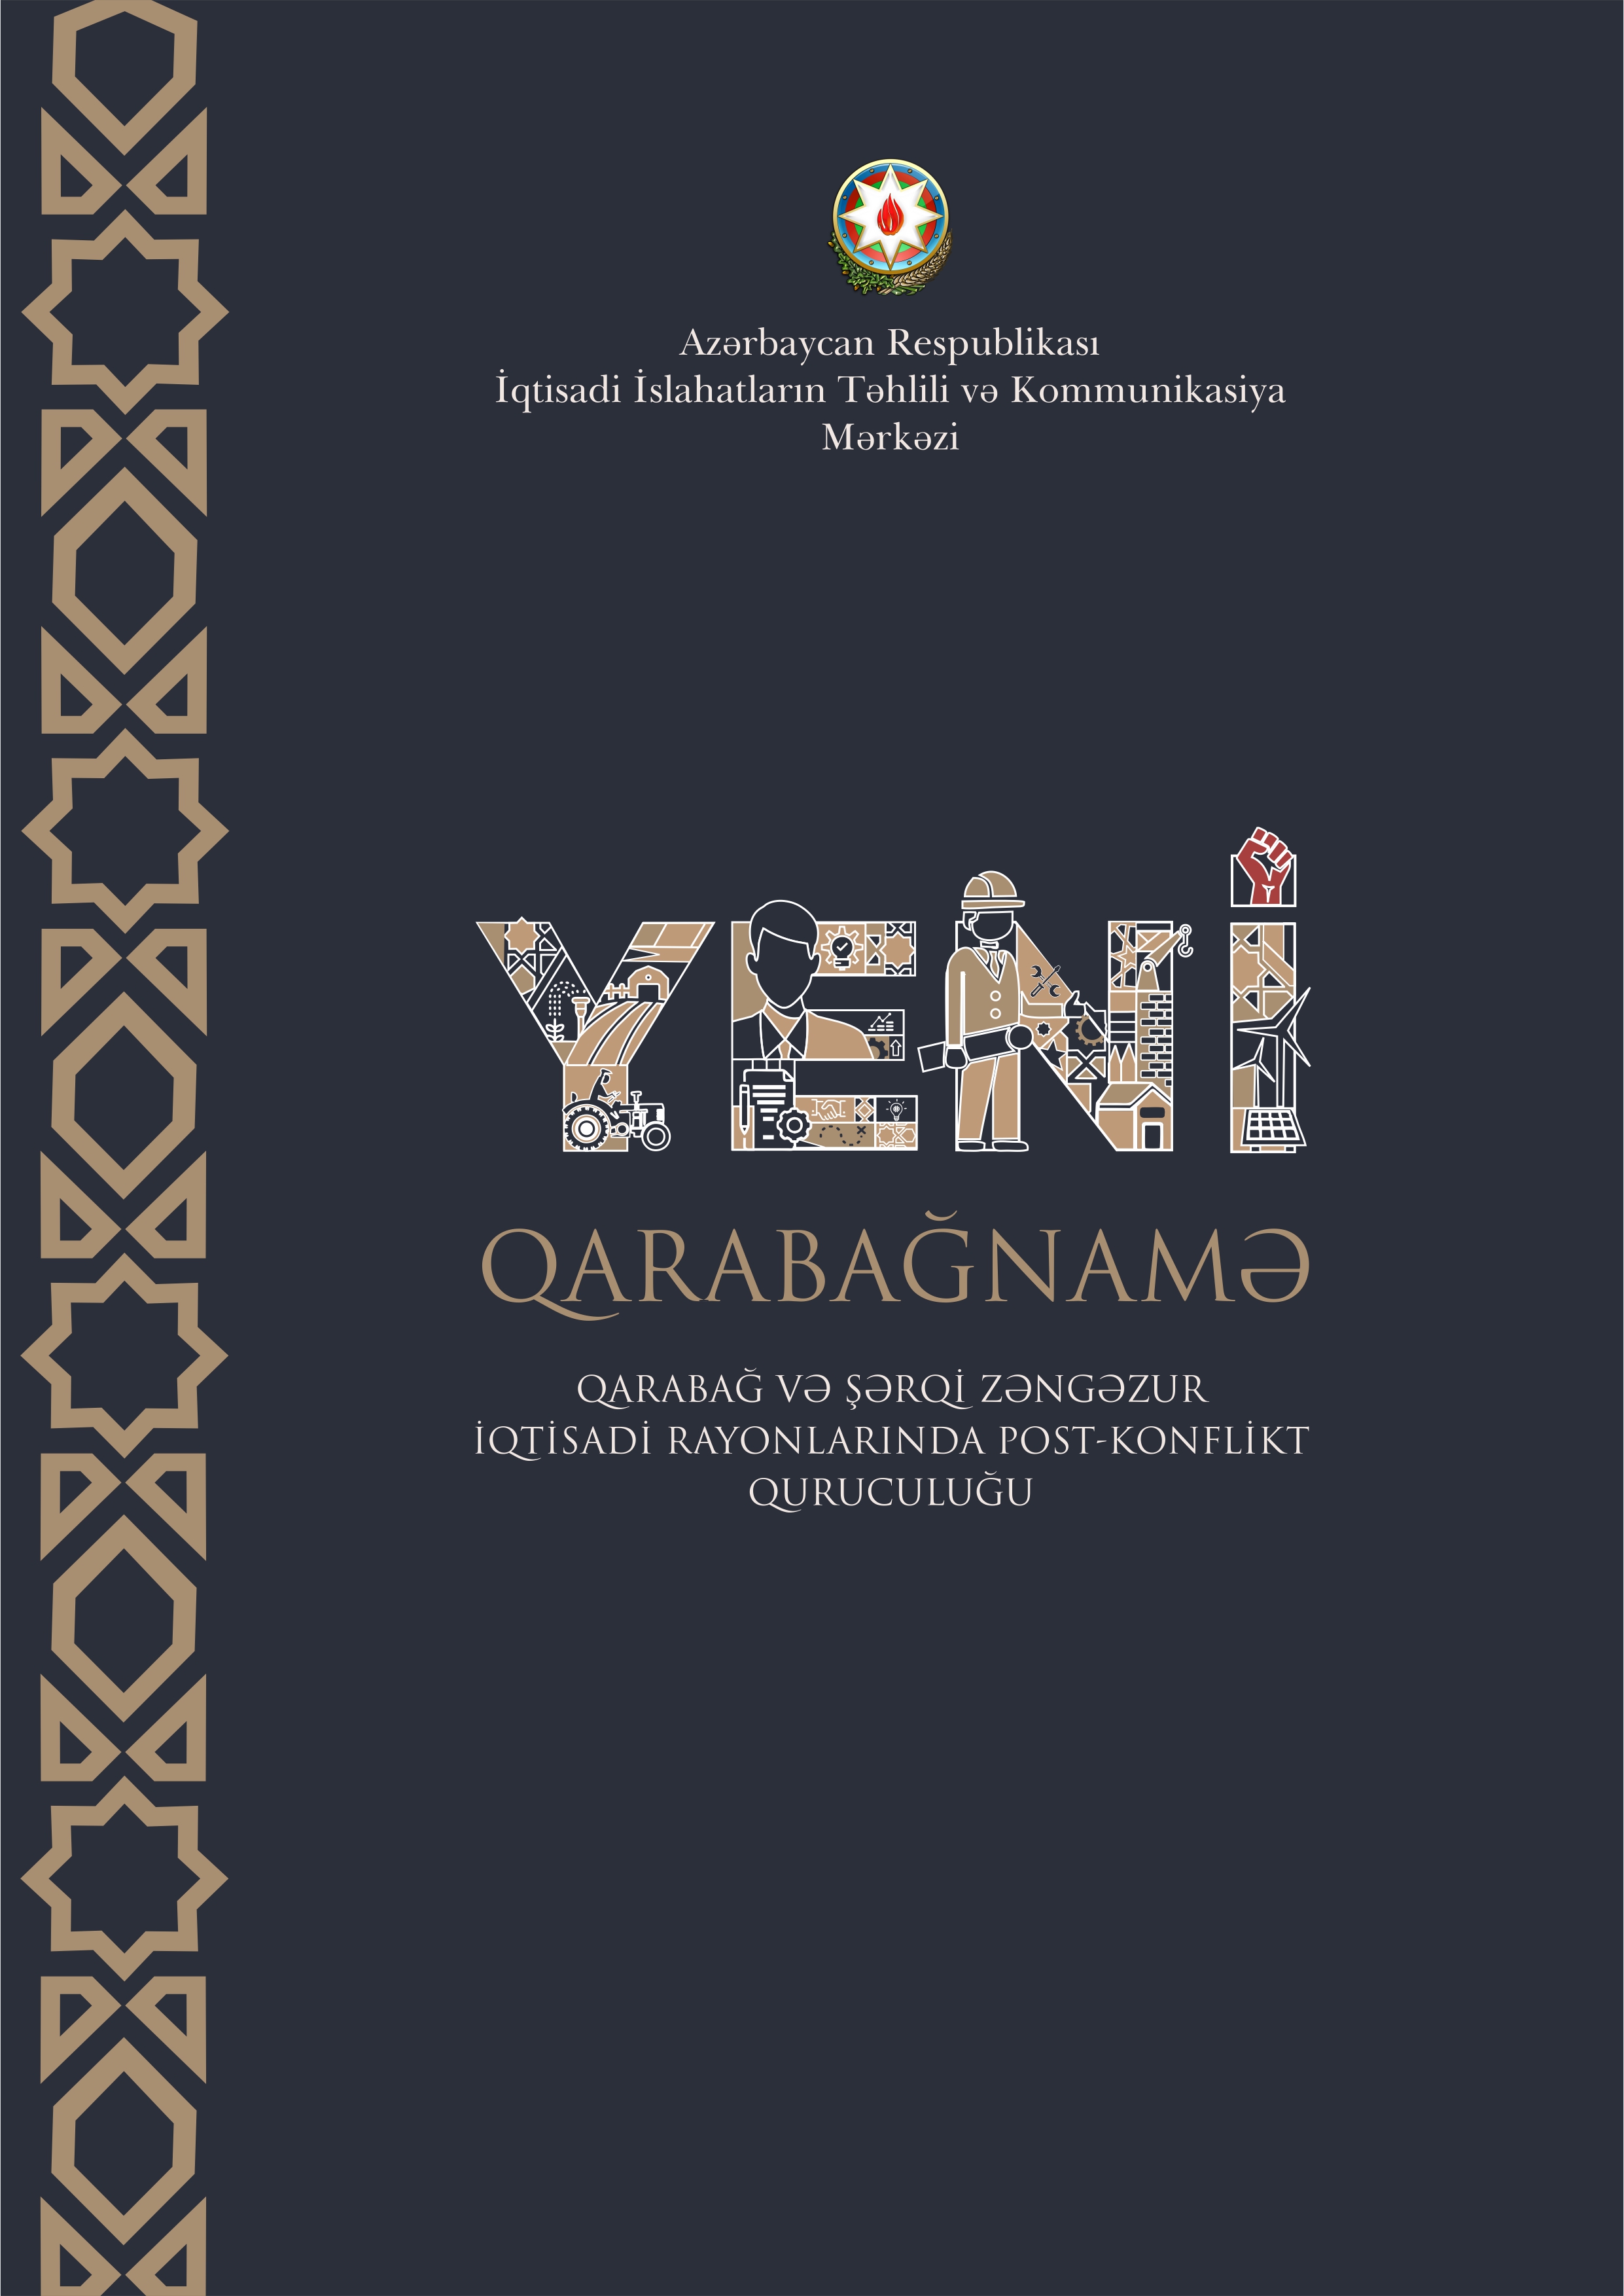 The Center for Analysis of Economic Reforms and Communication presented the book "Yeni Qarabağnamə"